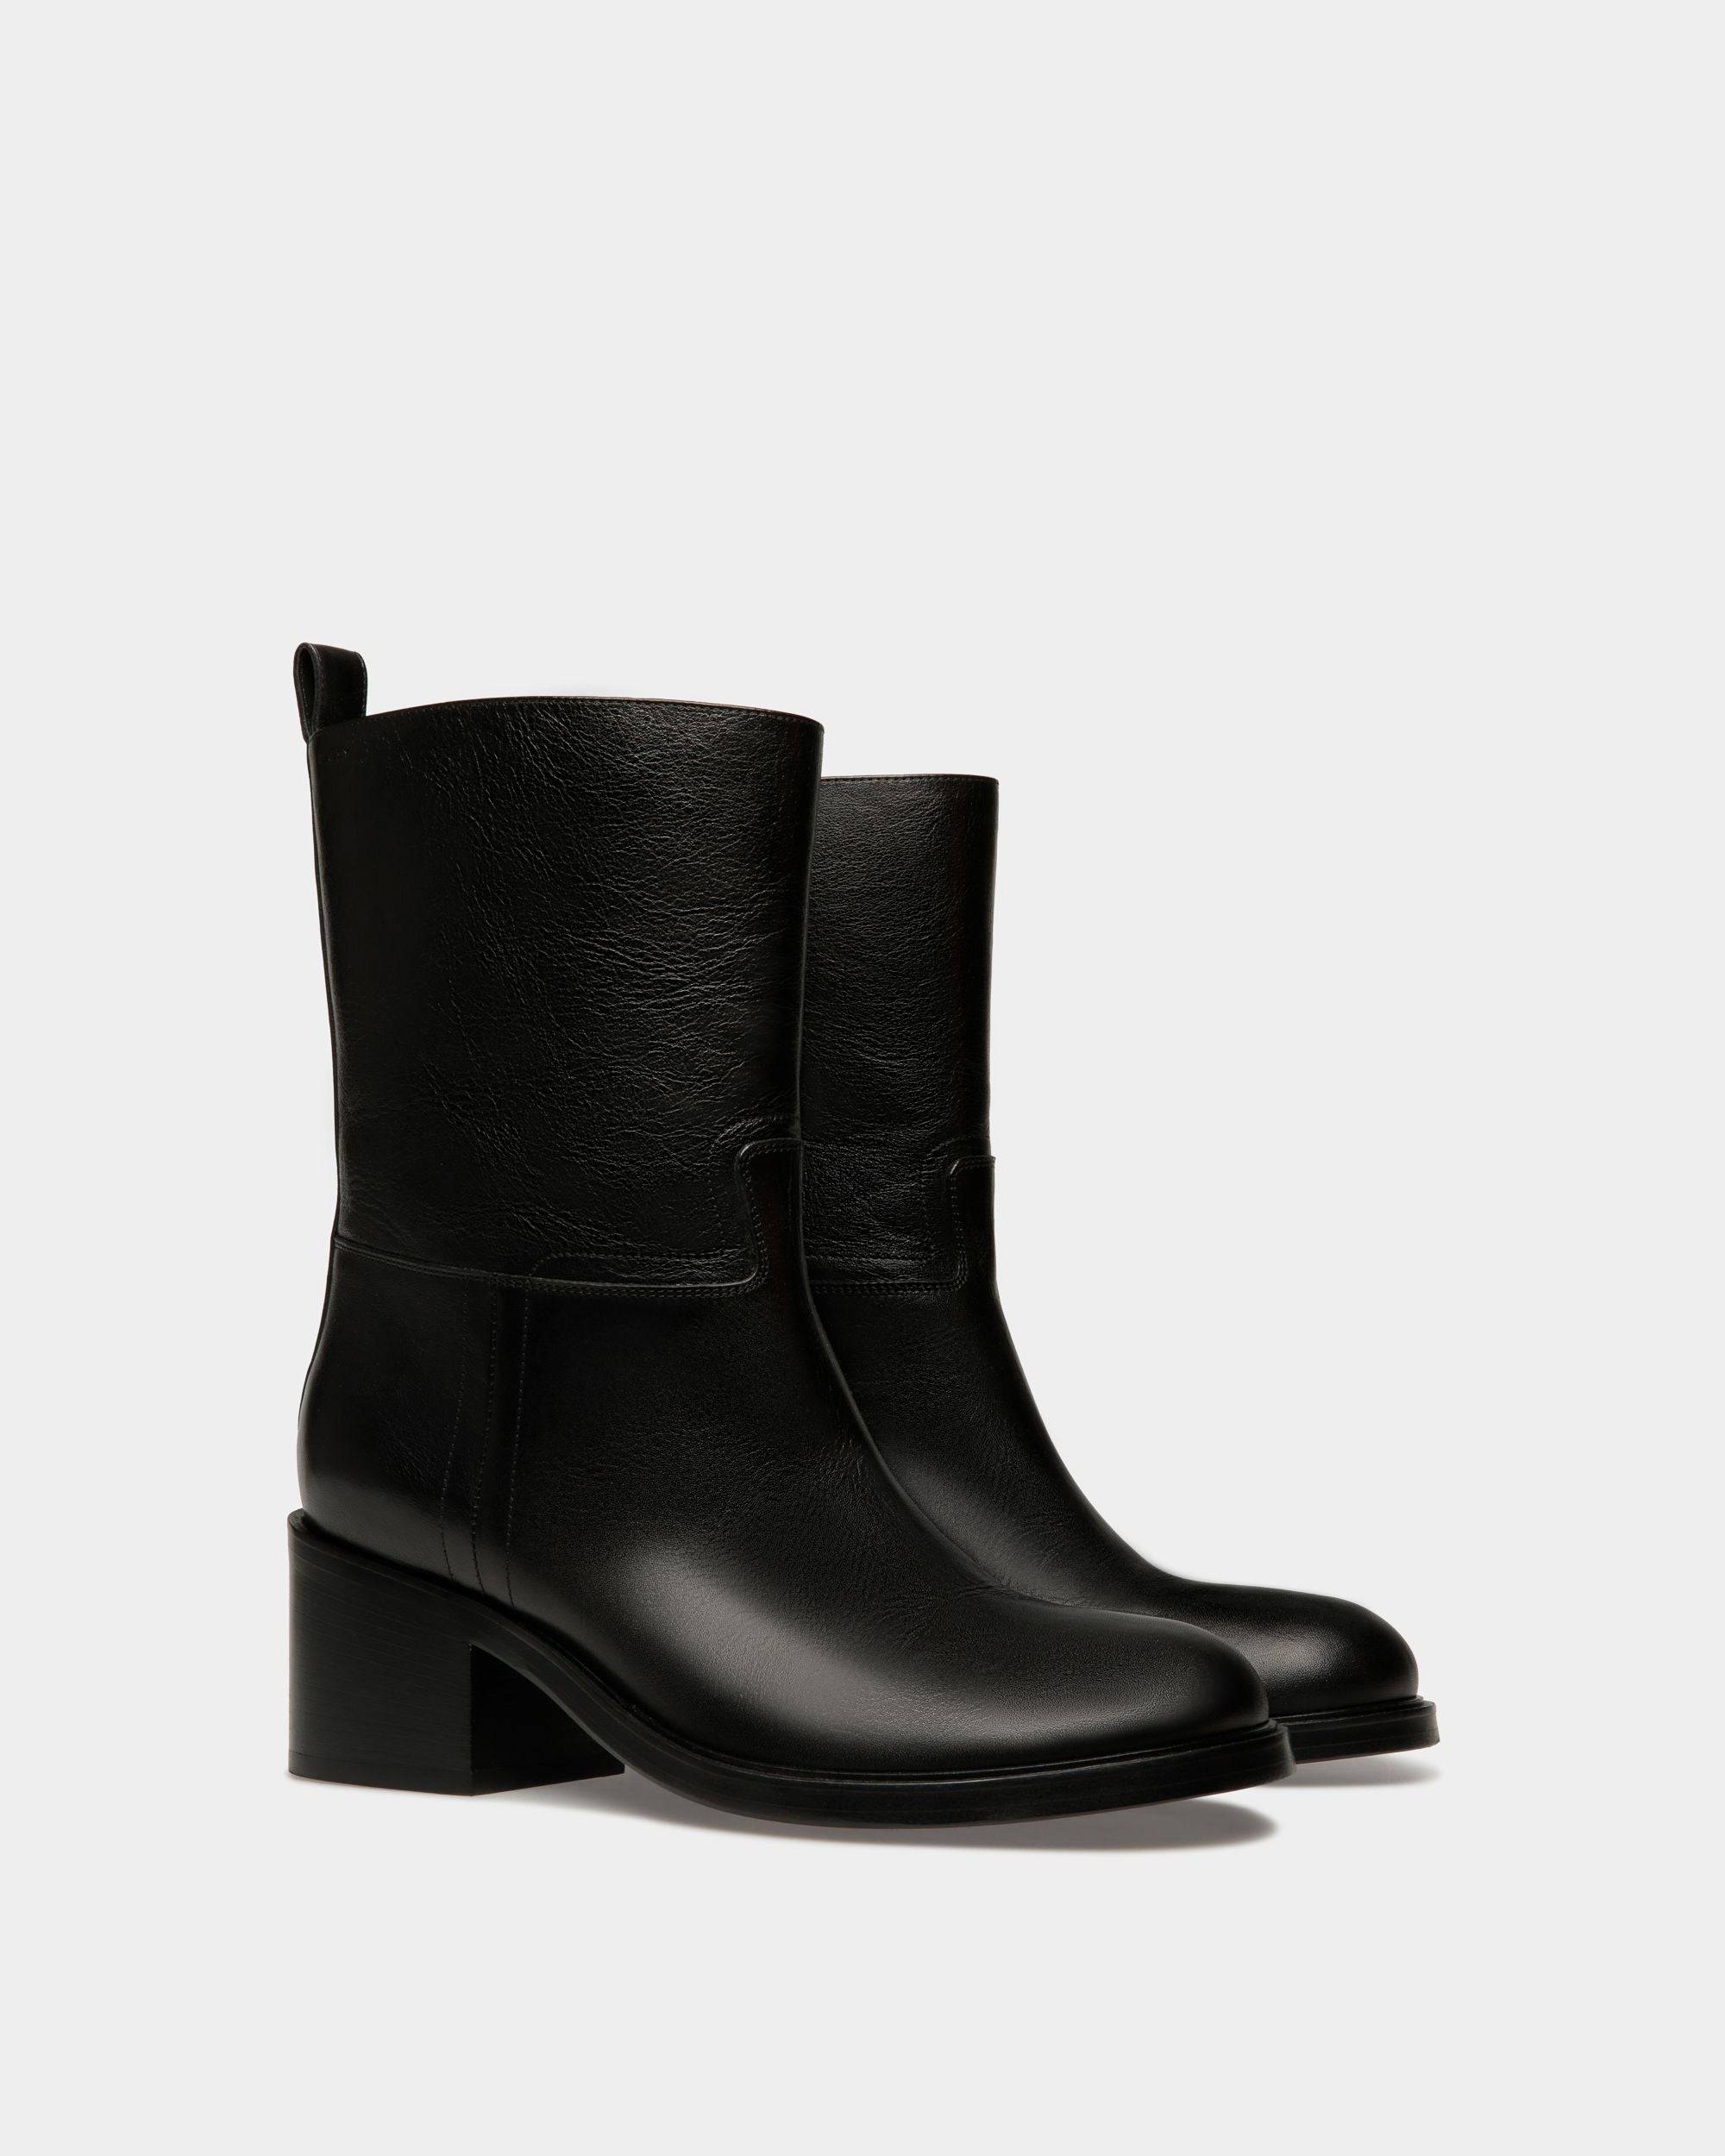 Peggy | Men's Boot in Black Leather | Bally | Still Life 3/4 Front